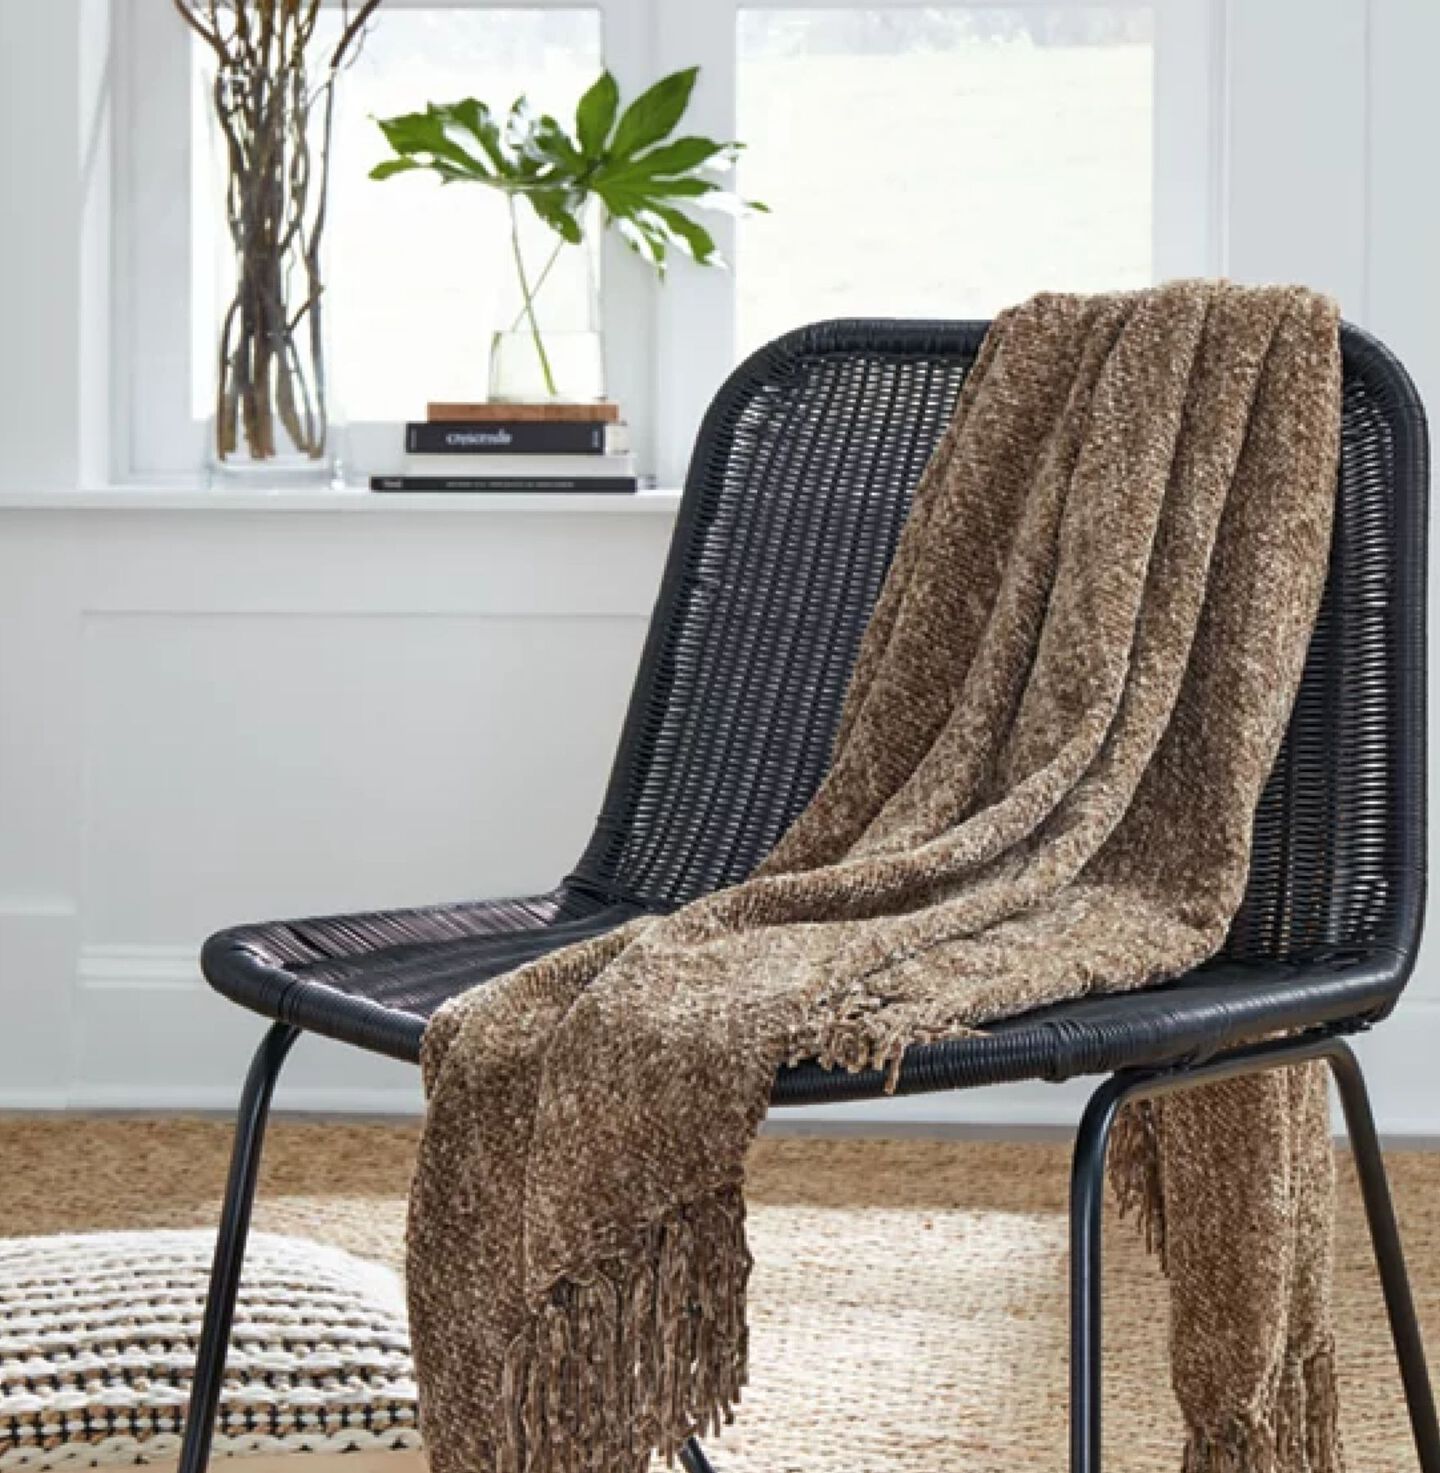 Single black chair with a brown plush blanket draped over it